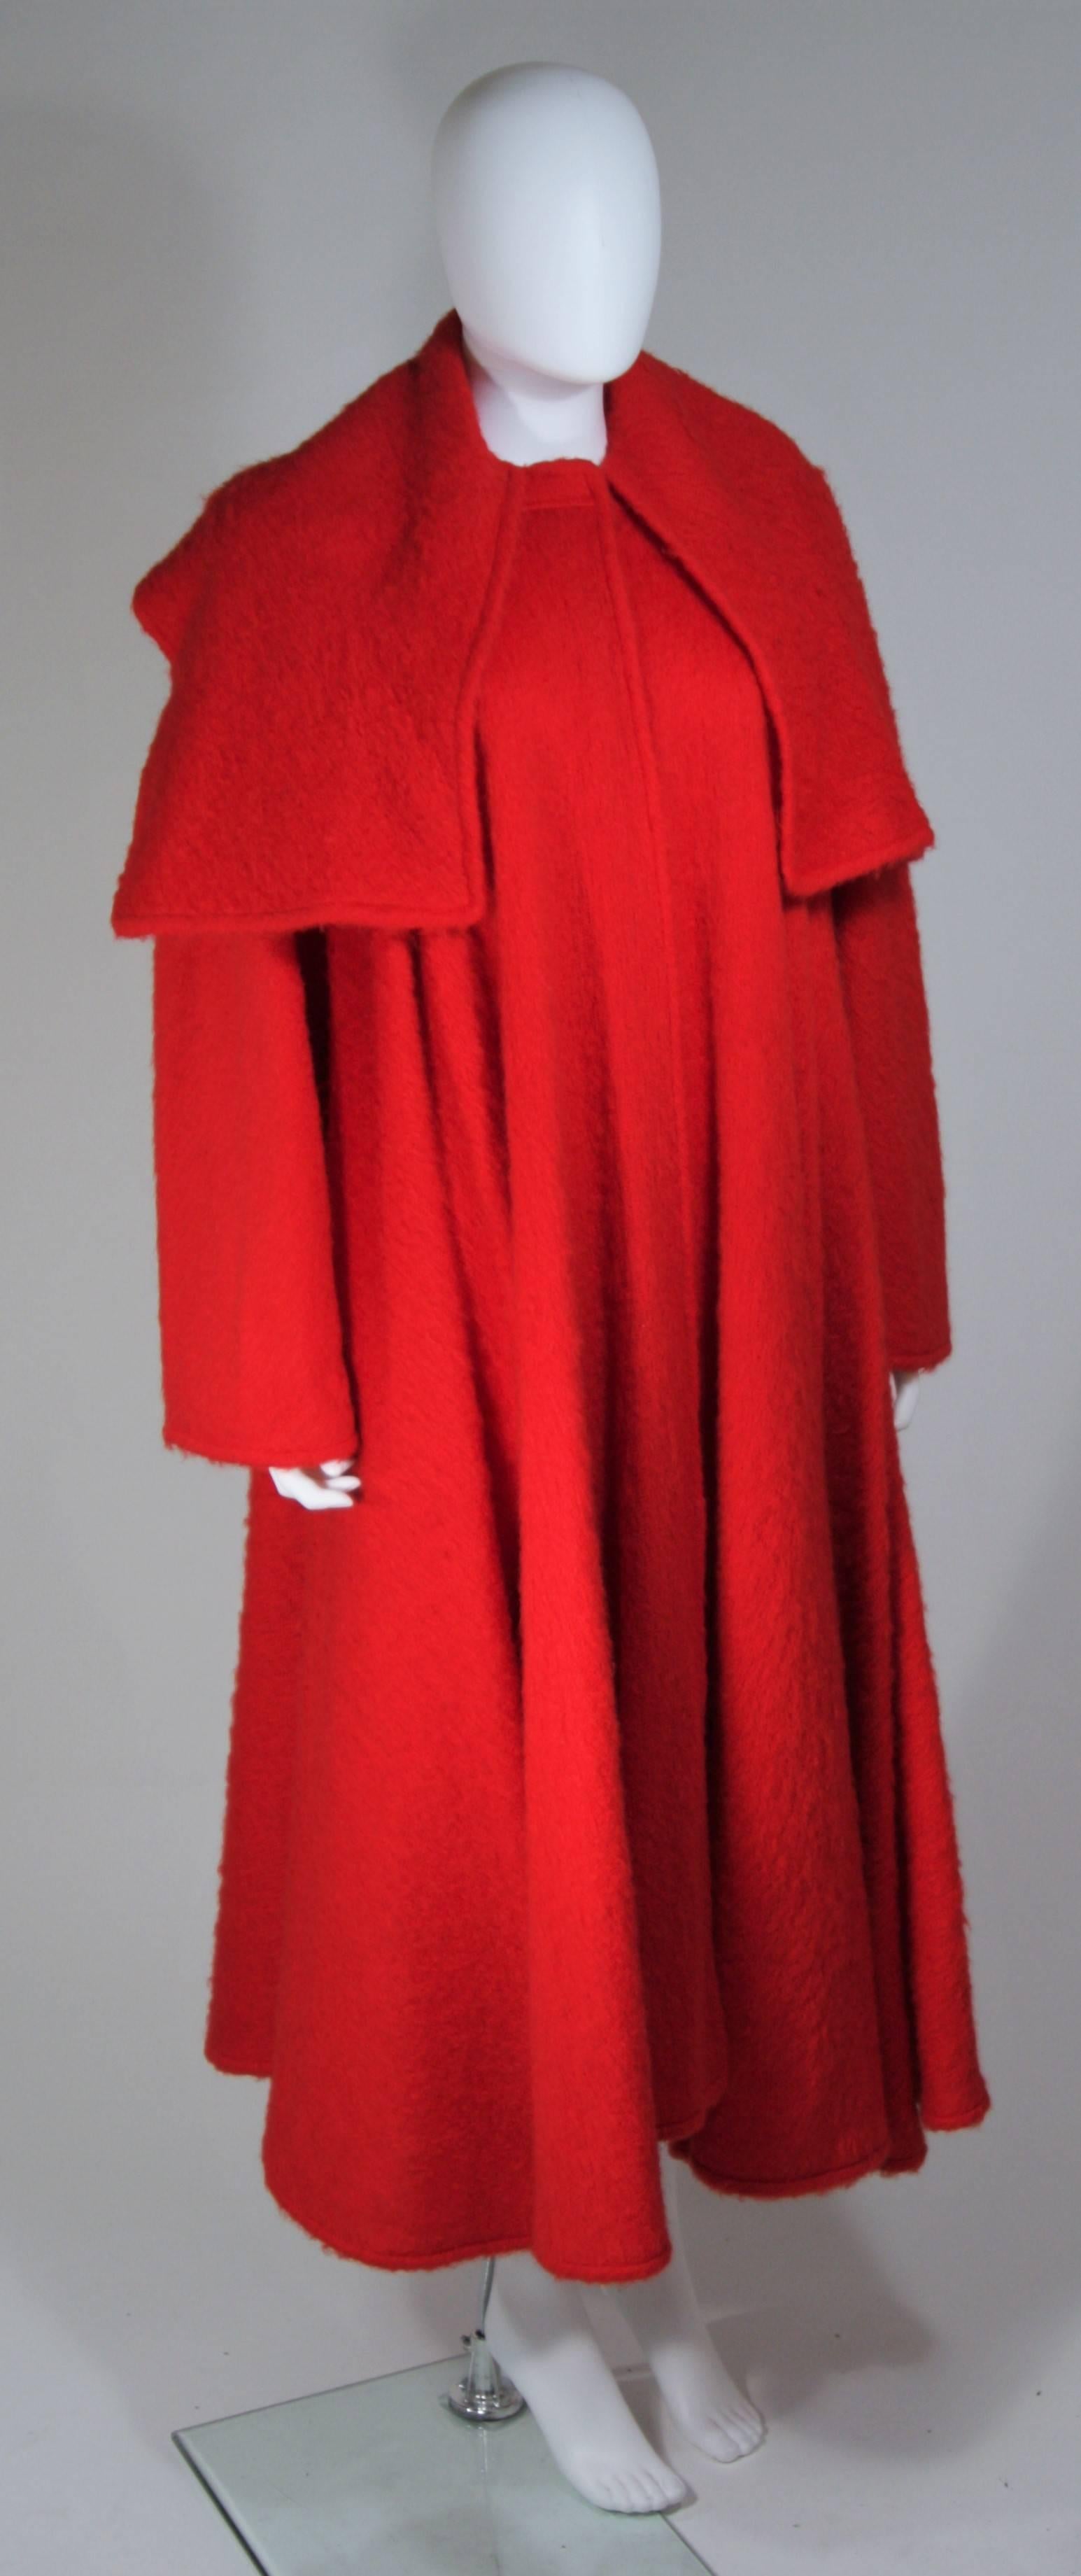 VALENTINO Circa 1980's Dramatic Red Mohair Coat with Draped Collar  1